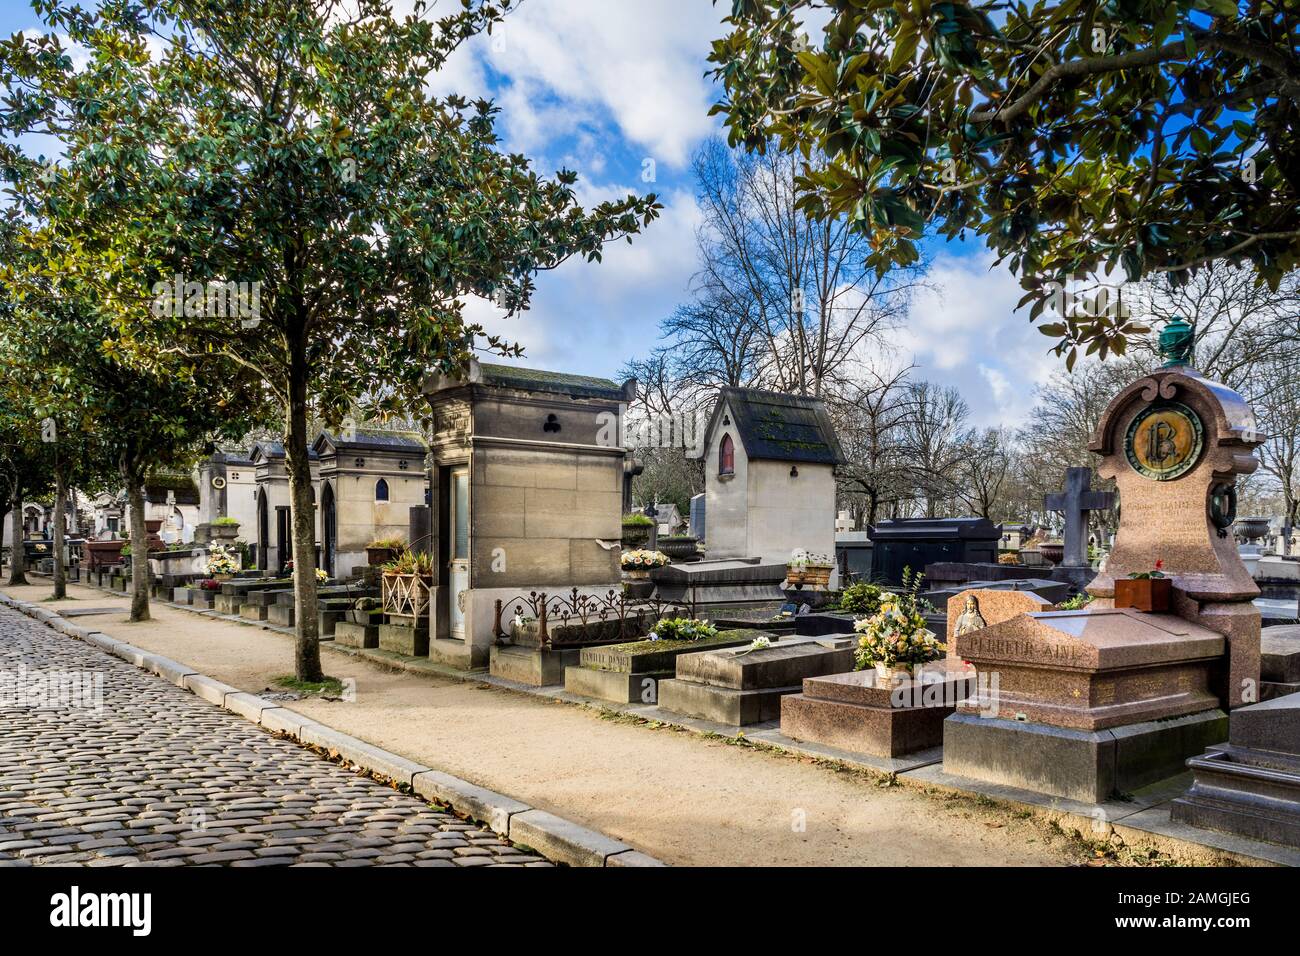 Ornate memorial tombs in the Père Lachaise Cemetery, Paris 75020, France. Stock Photo